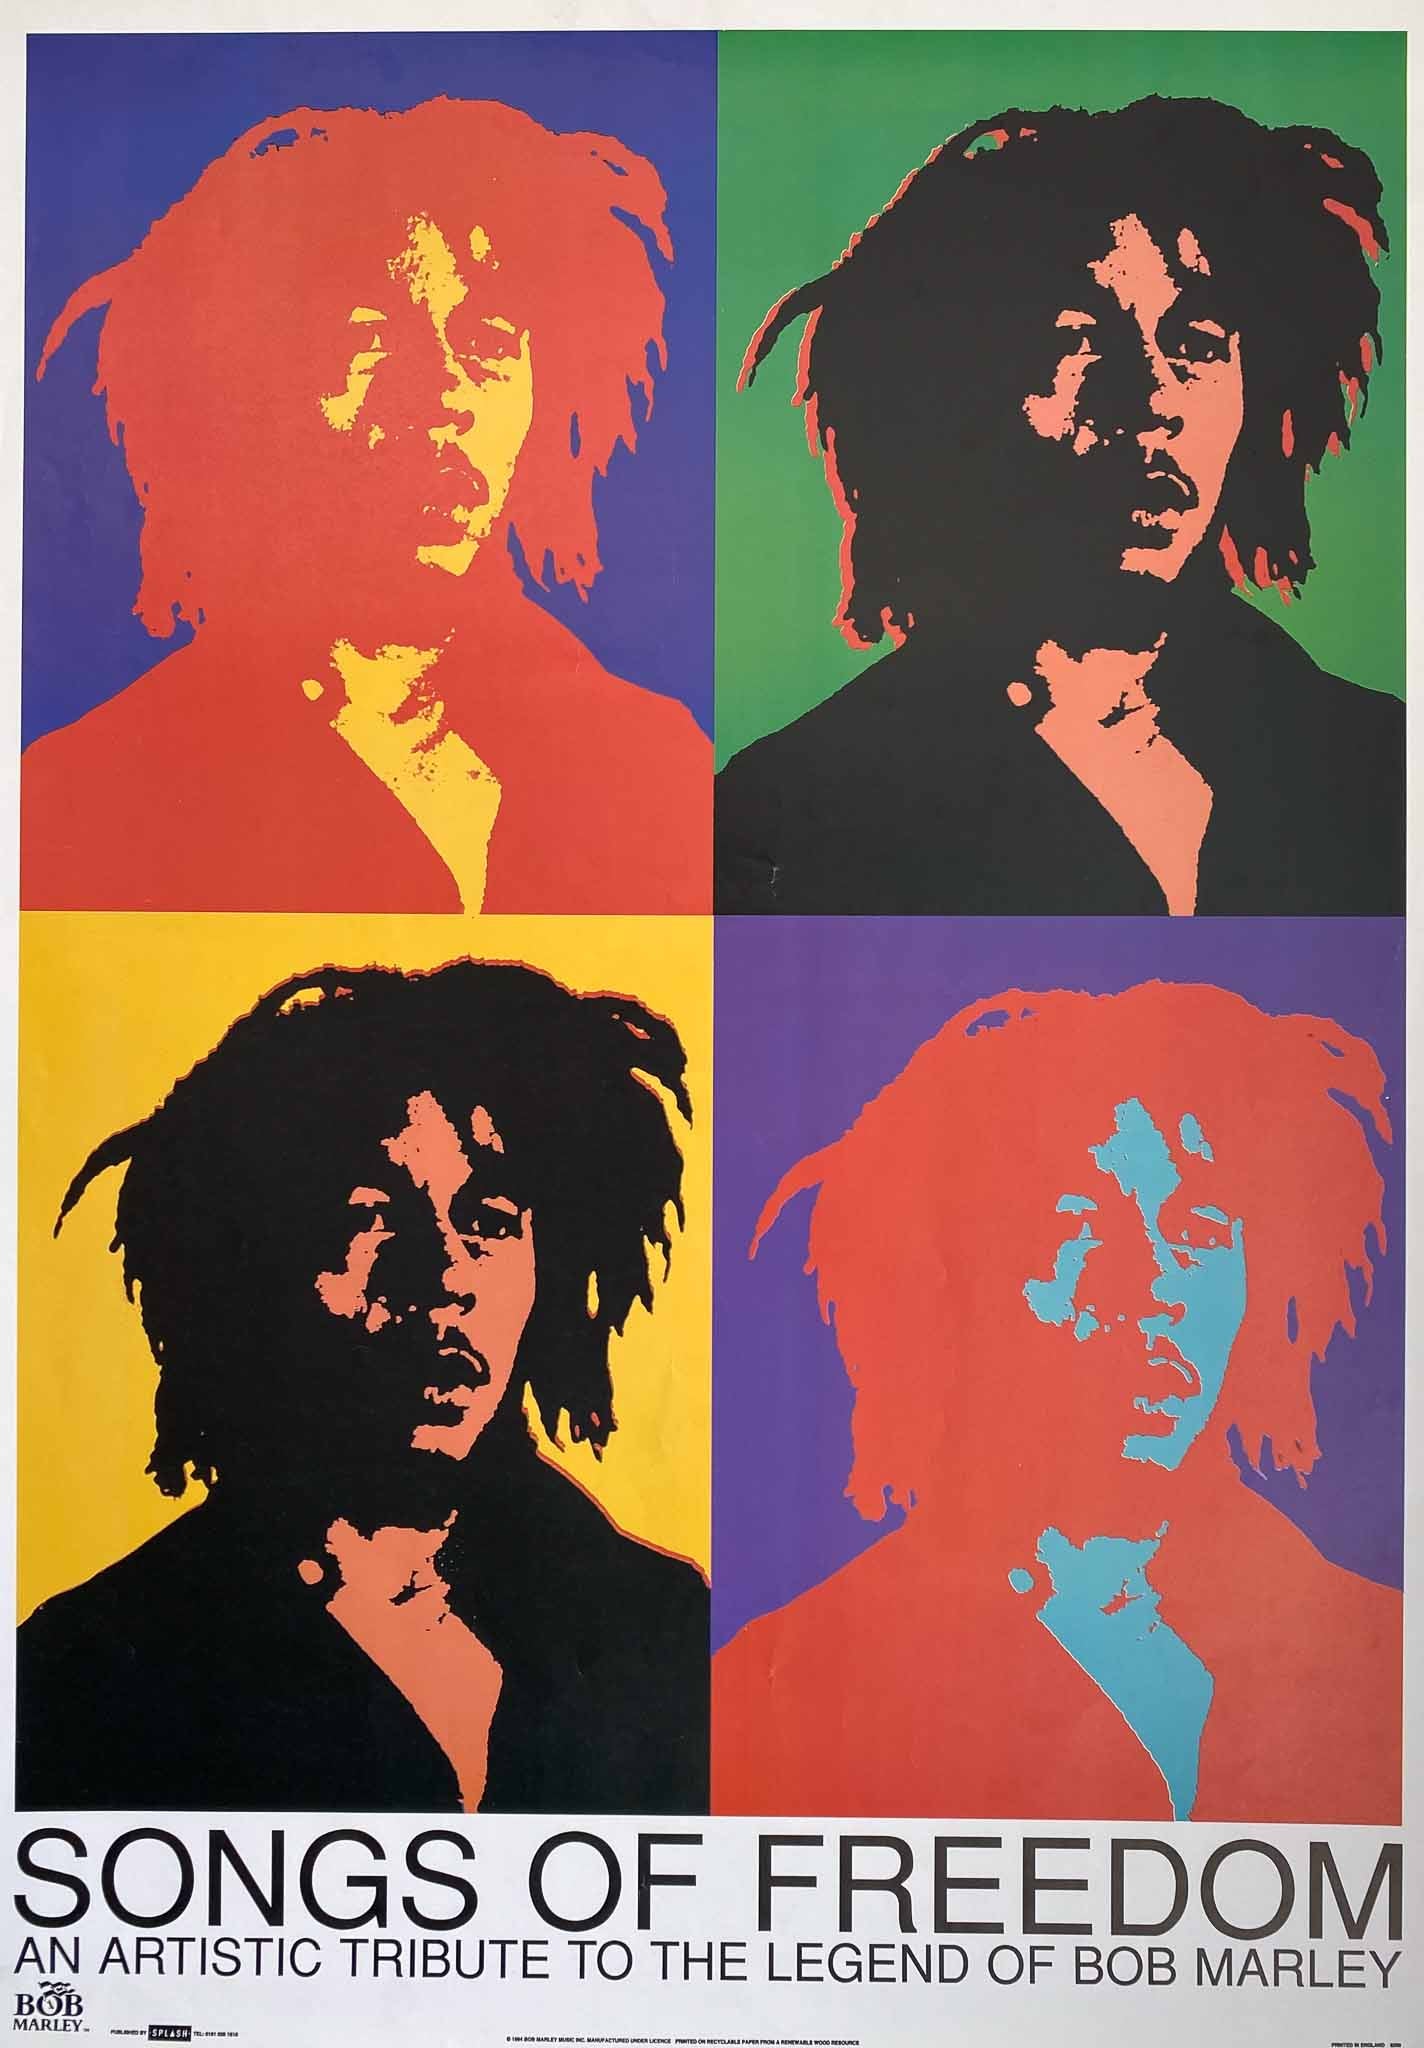 Affiche Bob Marley Song Of Freedom An Artistic Tribute To The Legend Of Bob Marley d'après Andy Warhol, 1994